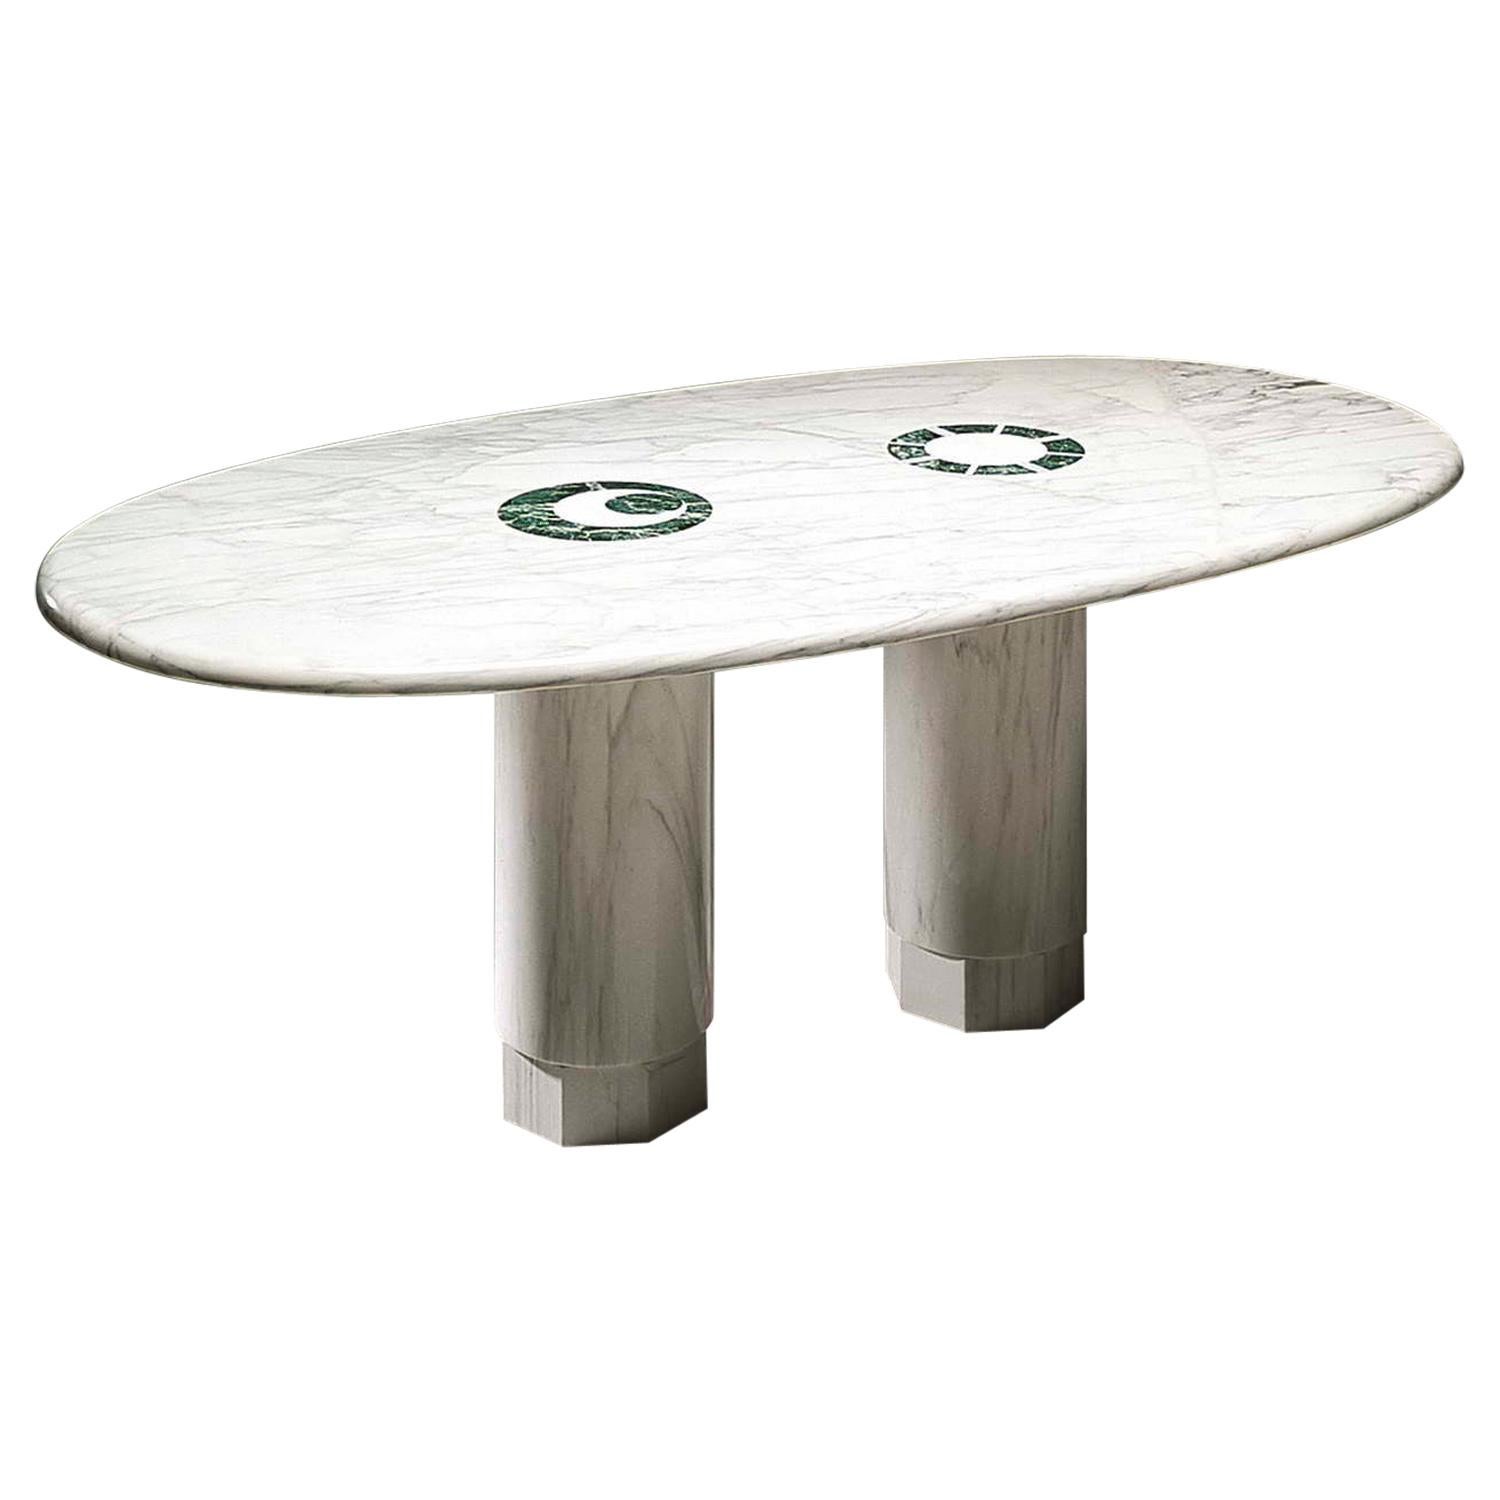 21st Century by Adolfo Natalini Sole e Luna Inlaid Marble Table White and Green